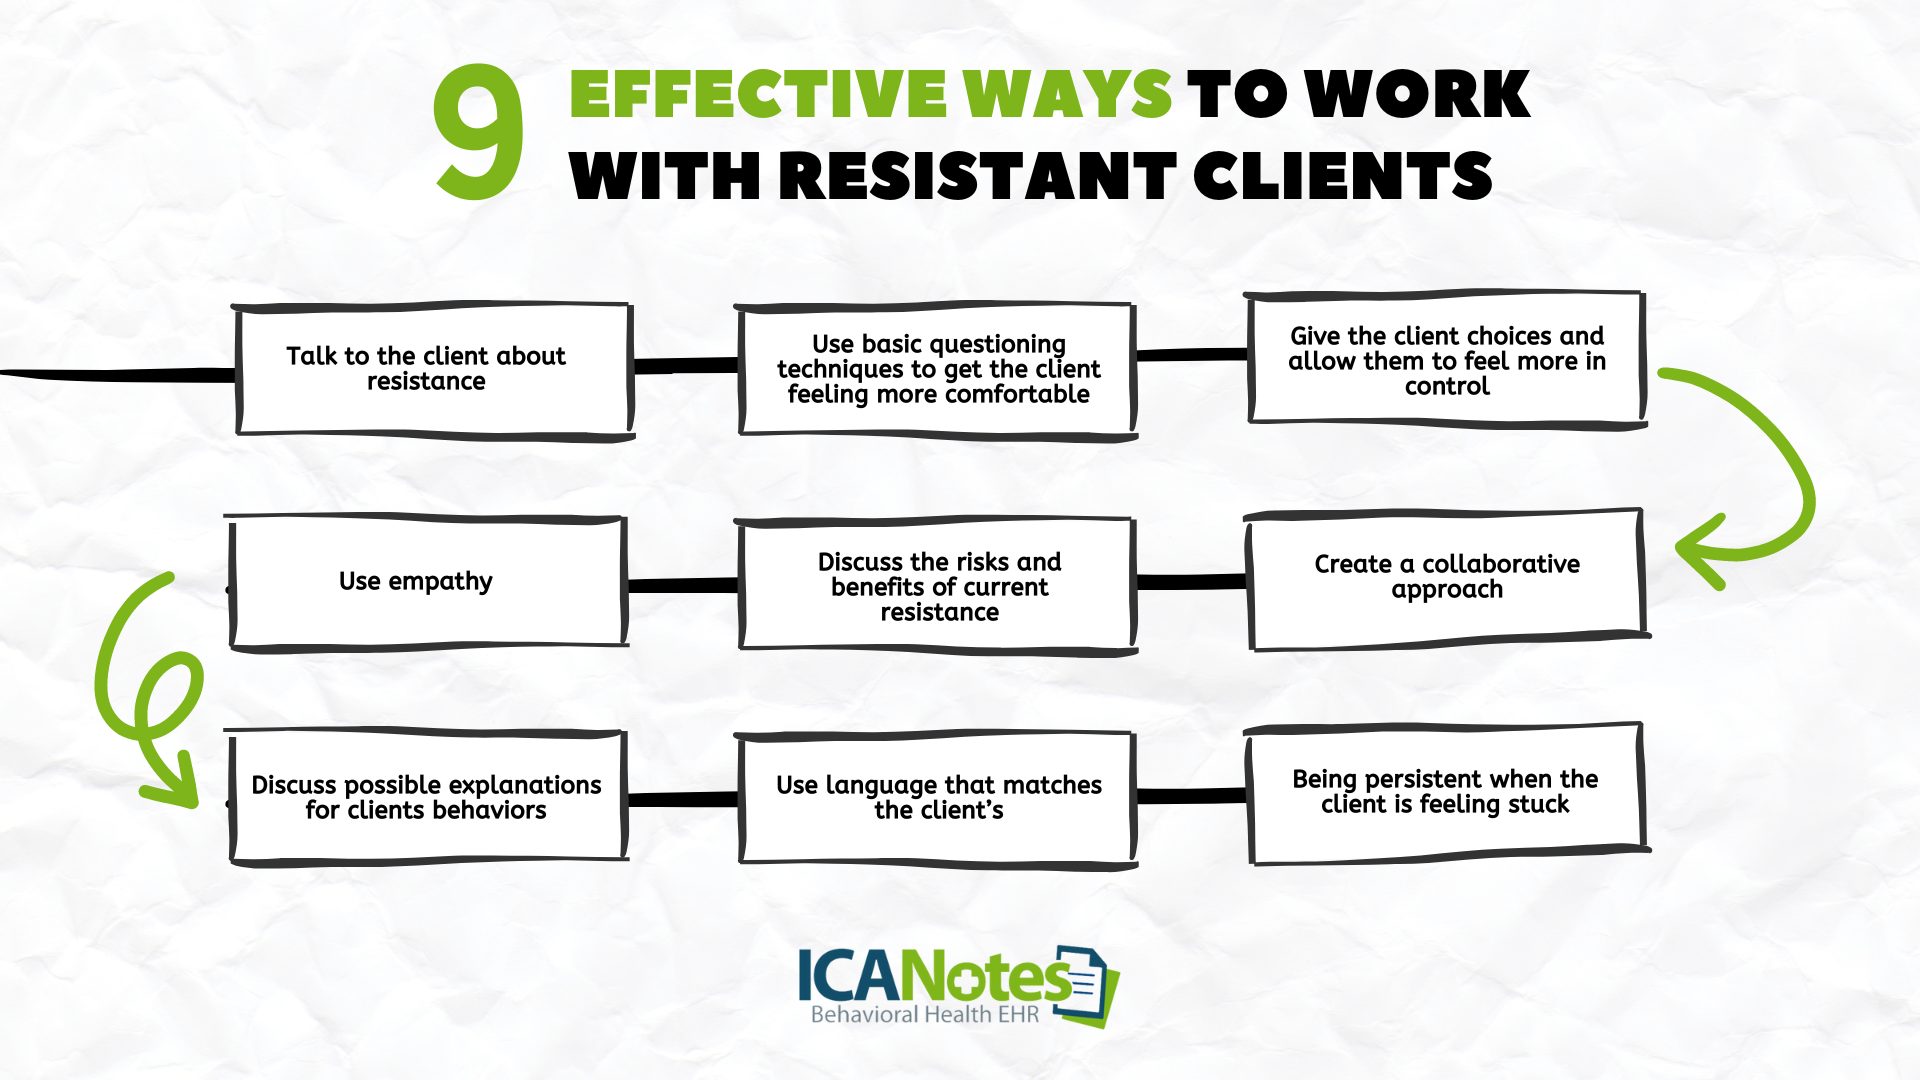 9 effective ways to work with resistant clients (1920 x 1080 px)